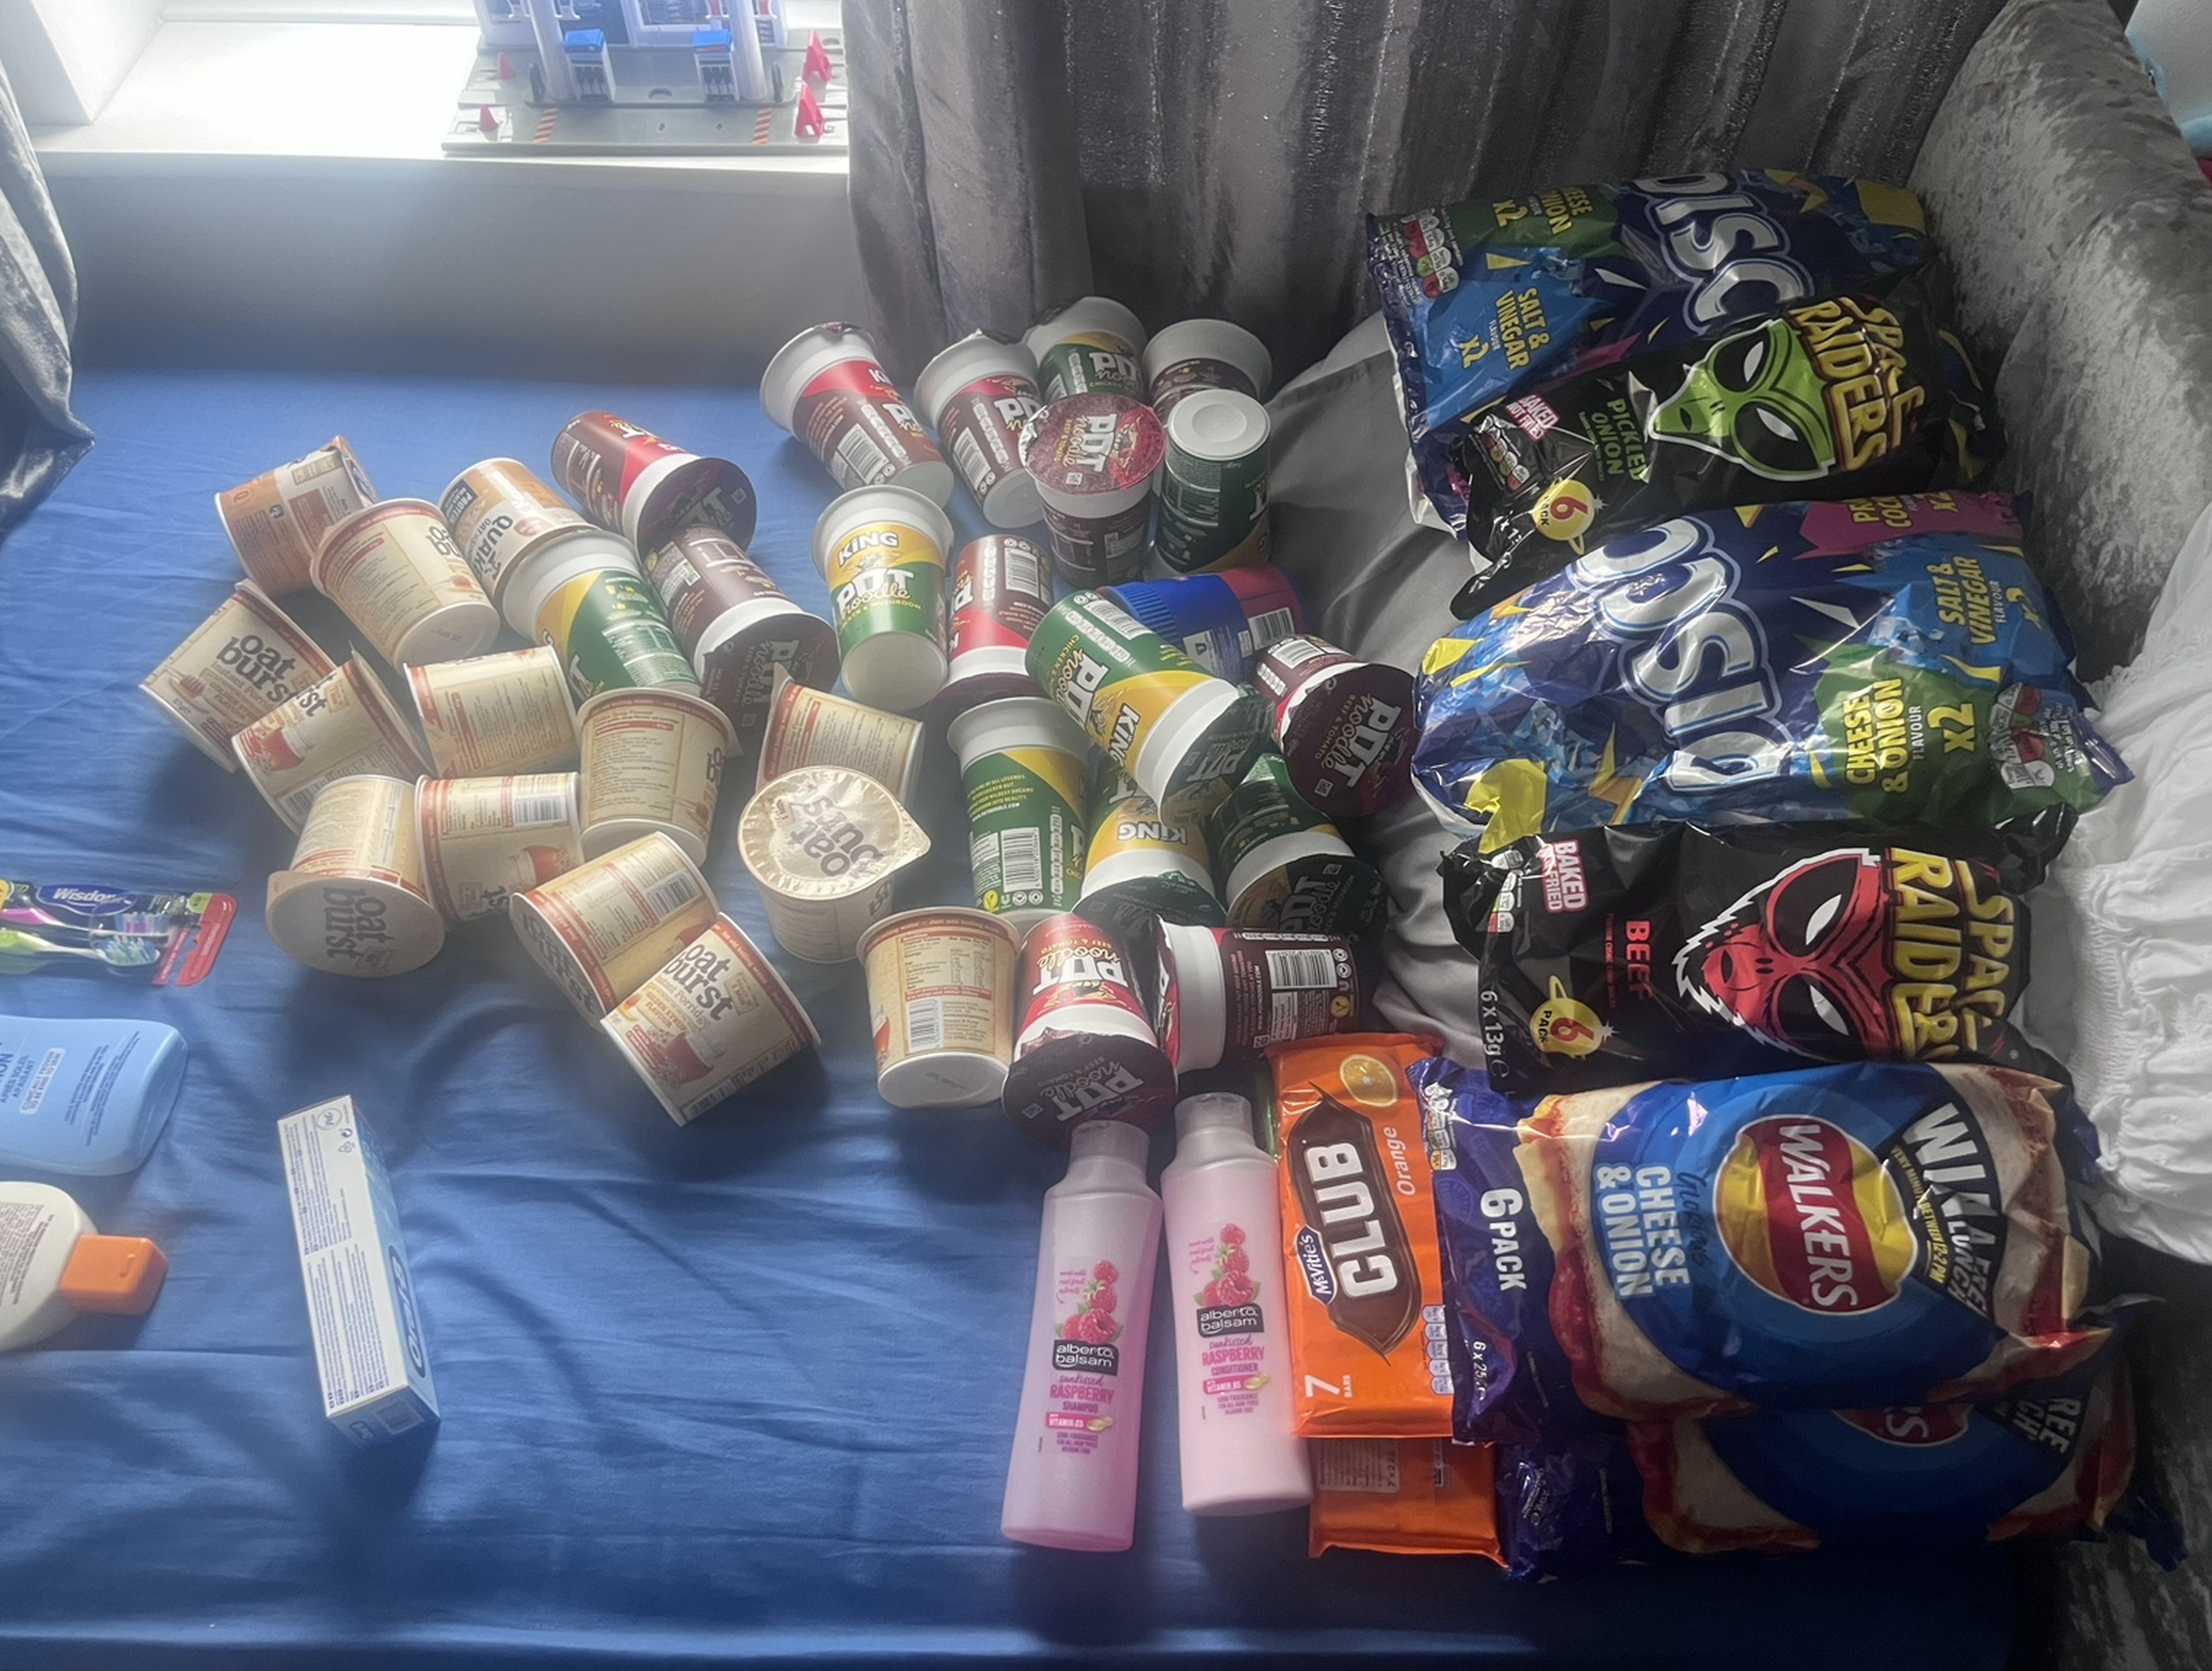 They took 86 bags of crisps, two packets of bacon, a pack of 30 sausages, cans of tuna, a block of cheese and brown sauce to Egypt